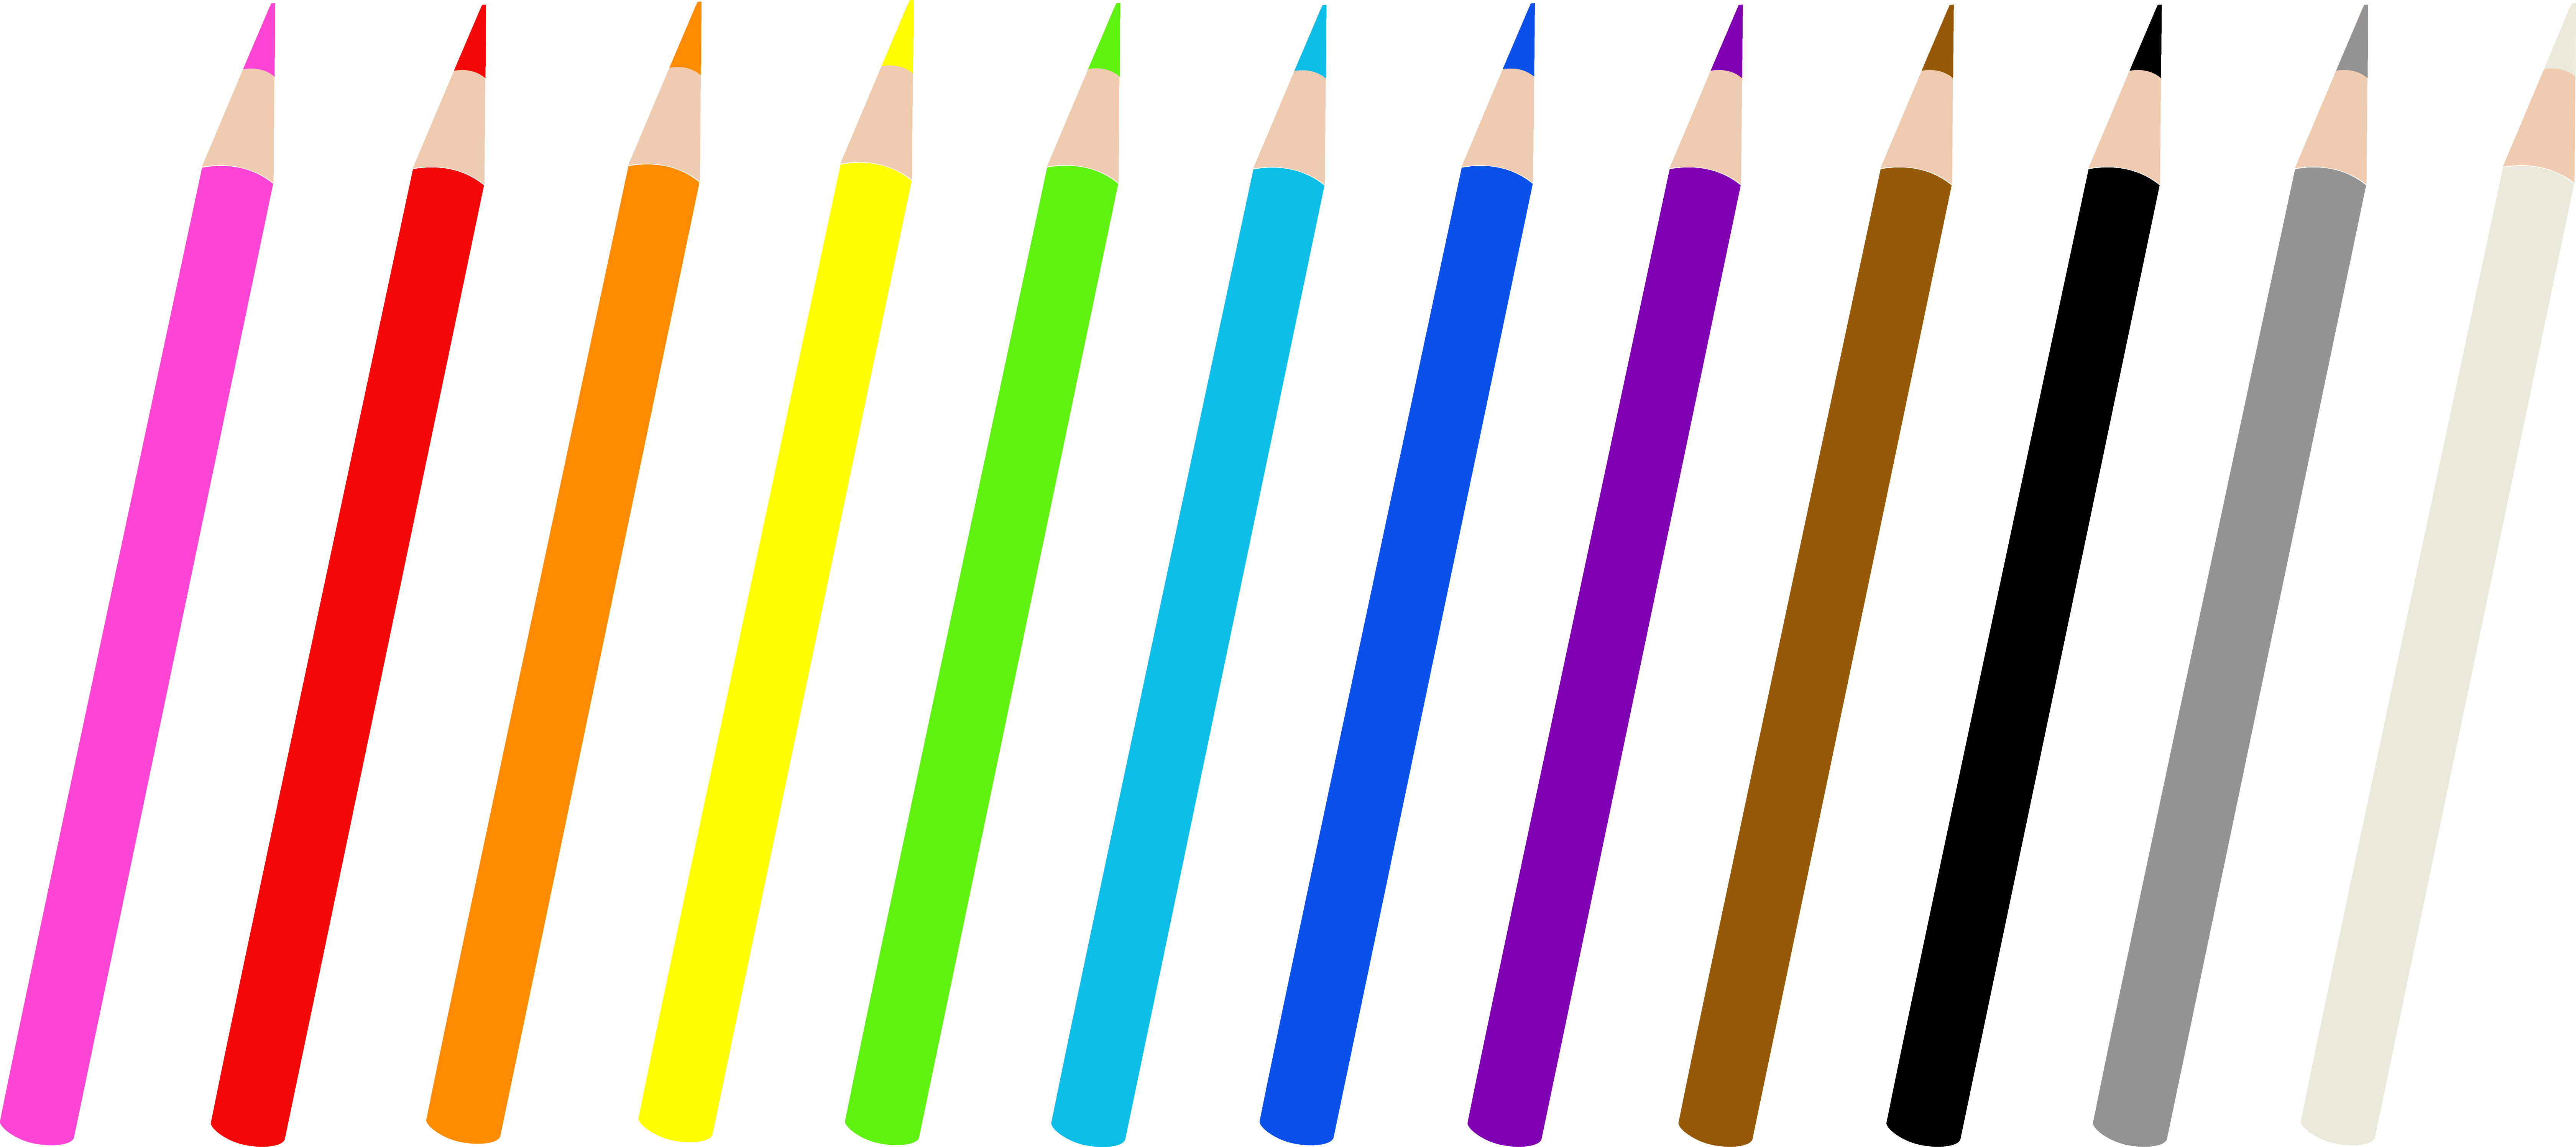 Set Of Twelve Colored Pencils Free clipart free image